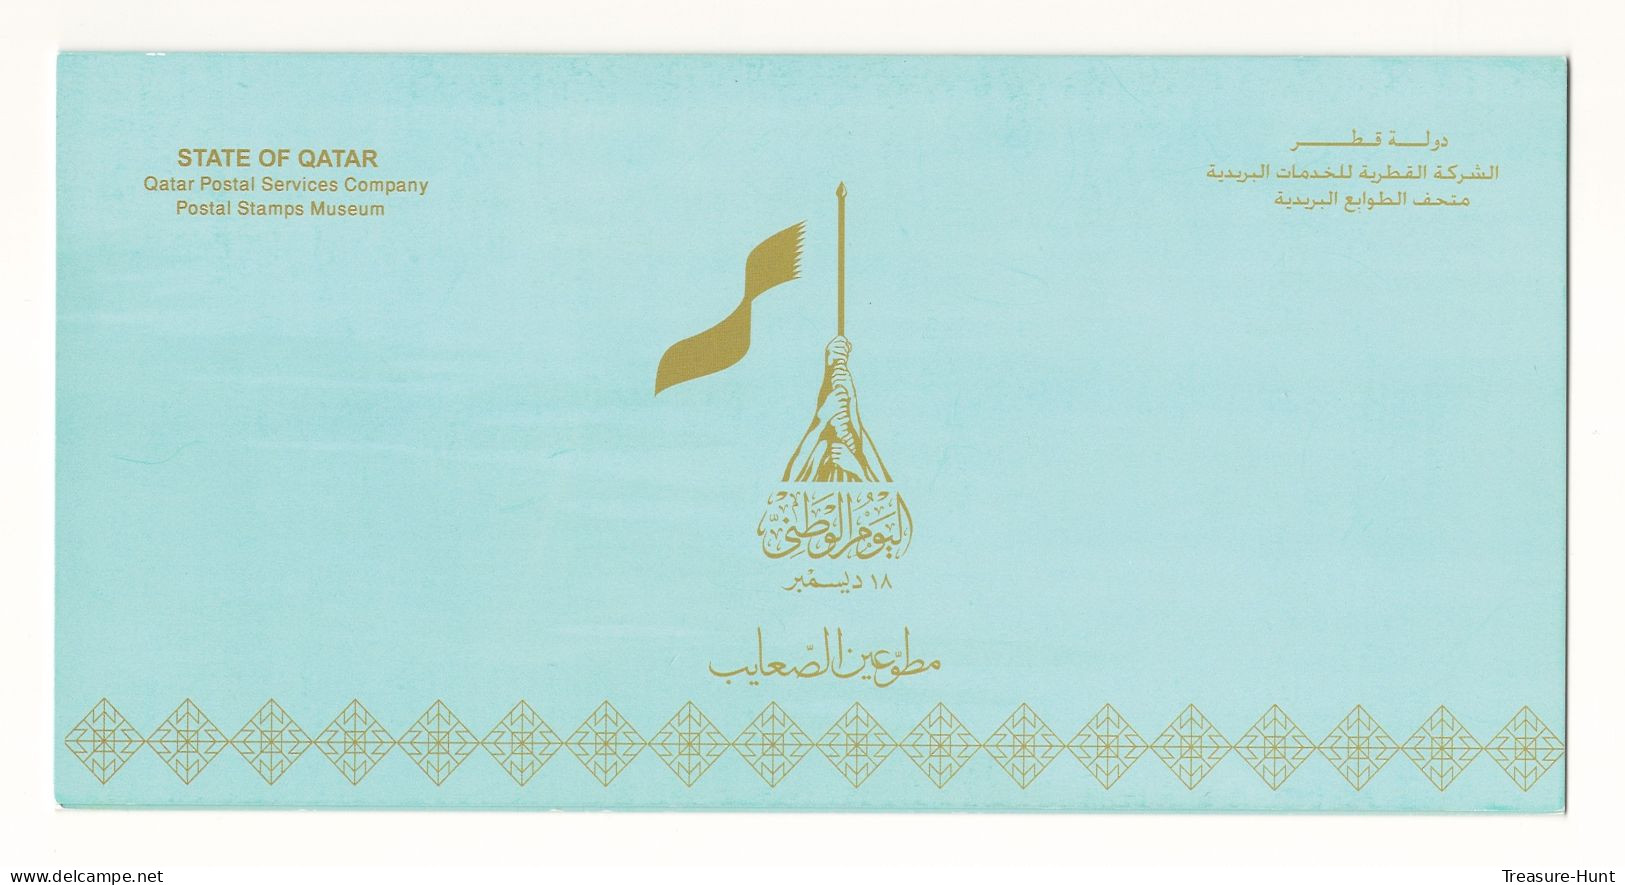 QATAR NEW STAMPS ISSUE BULLETIN / BROCHURE / POSTAL NOTICE - 2016 NATIONAL DAY CELEBRATIONS, FALCON PEARL DIVING FLAG - Qatar